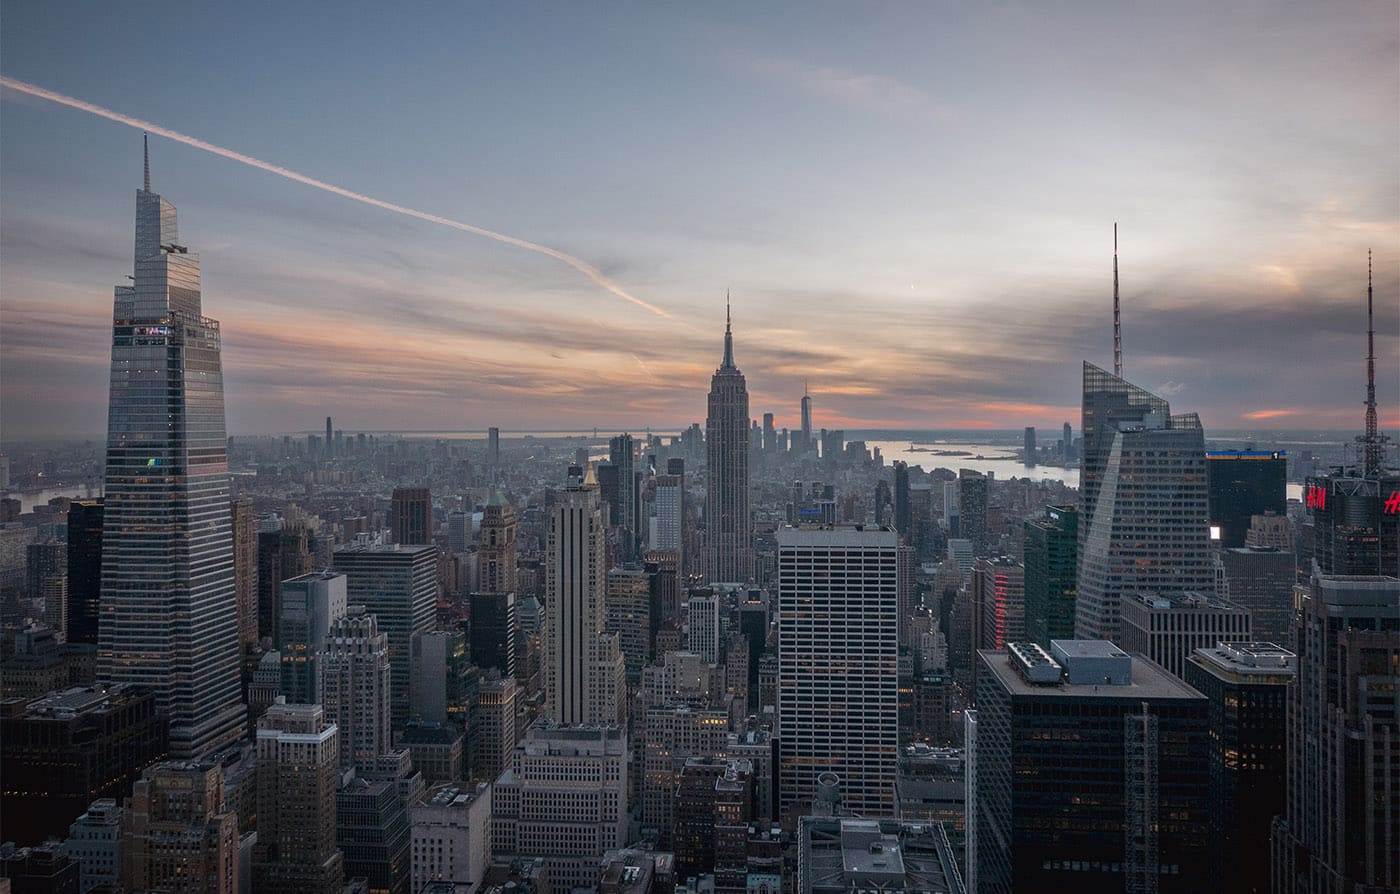 The 10 most beautiful photo spots in New York 12